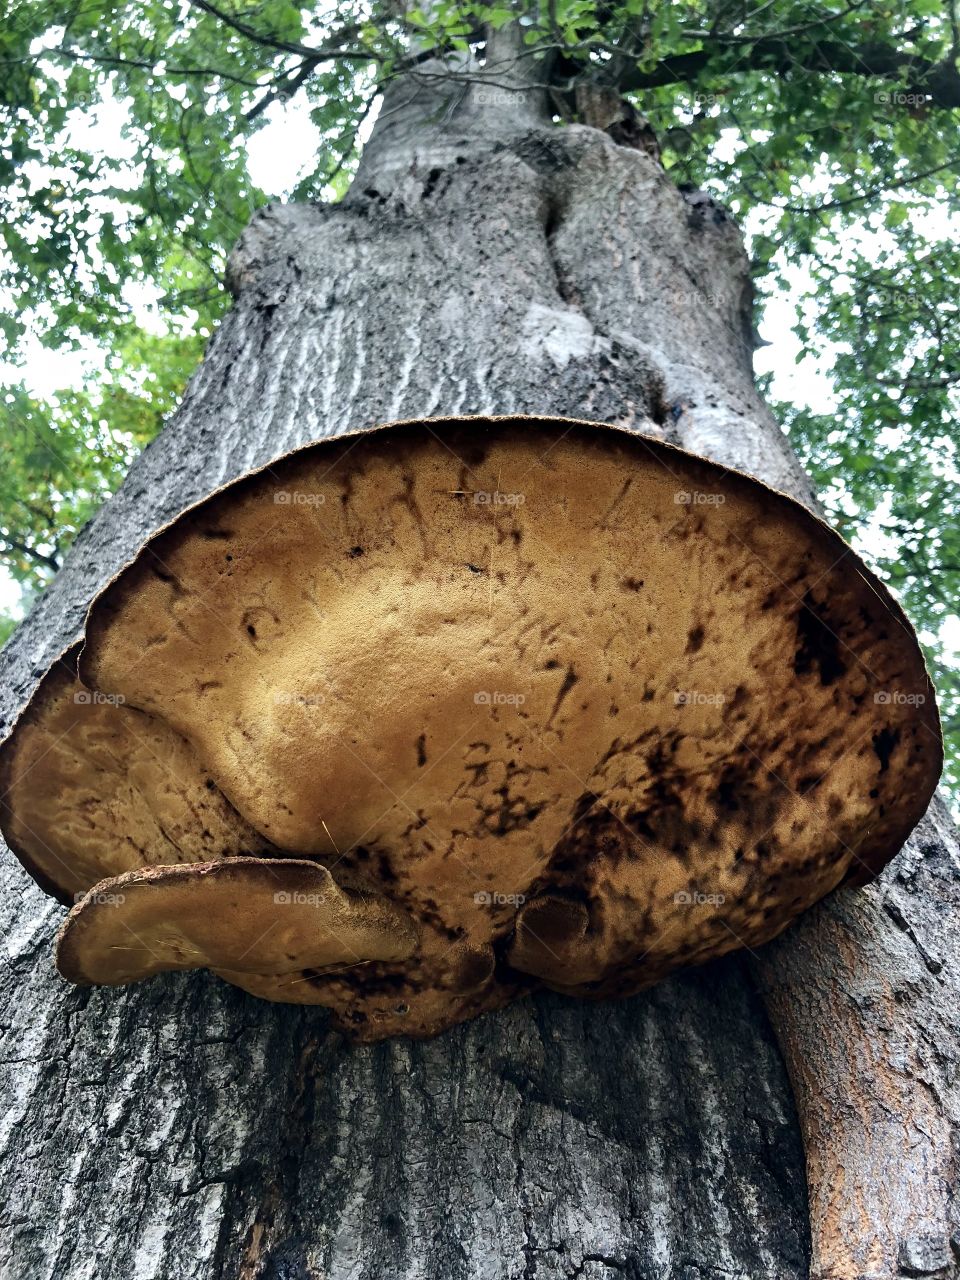 This huge oyster mushroom was growing about ten feet up the trunk of a tree. It was larger than a Thanksgiving dinner turkey platter.